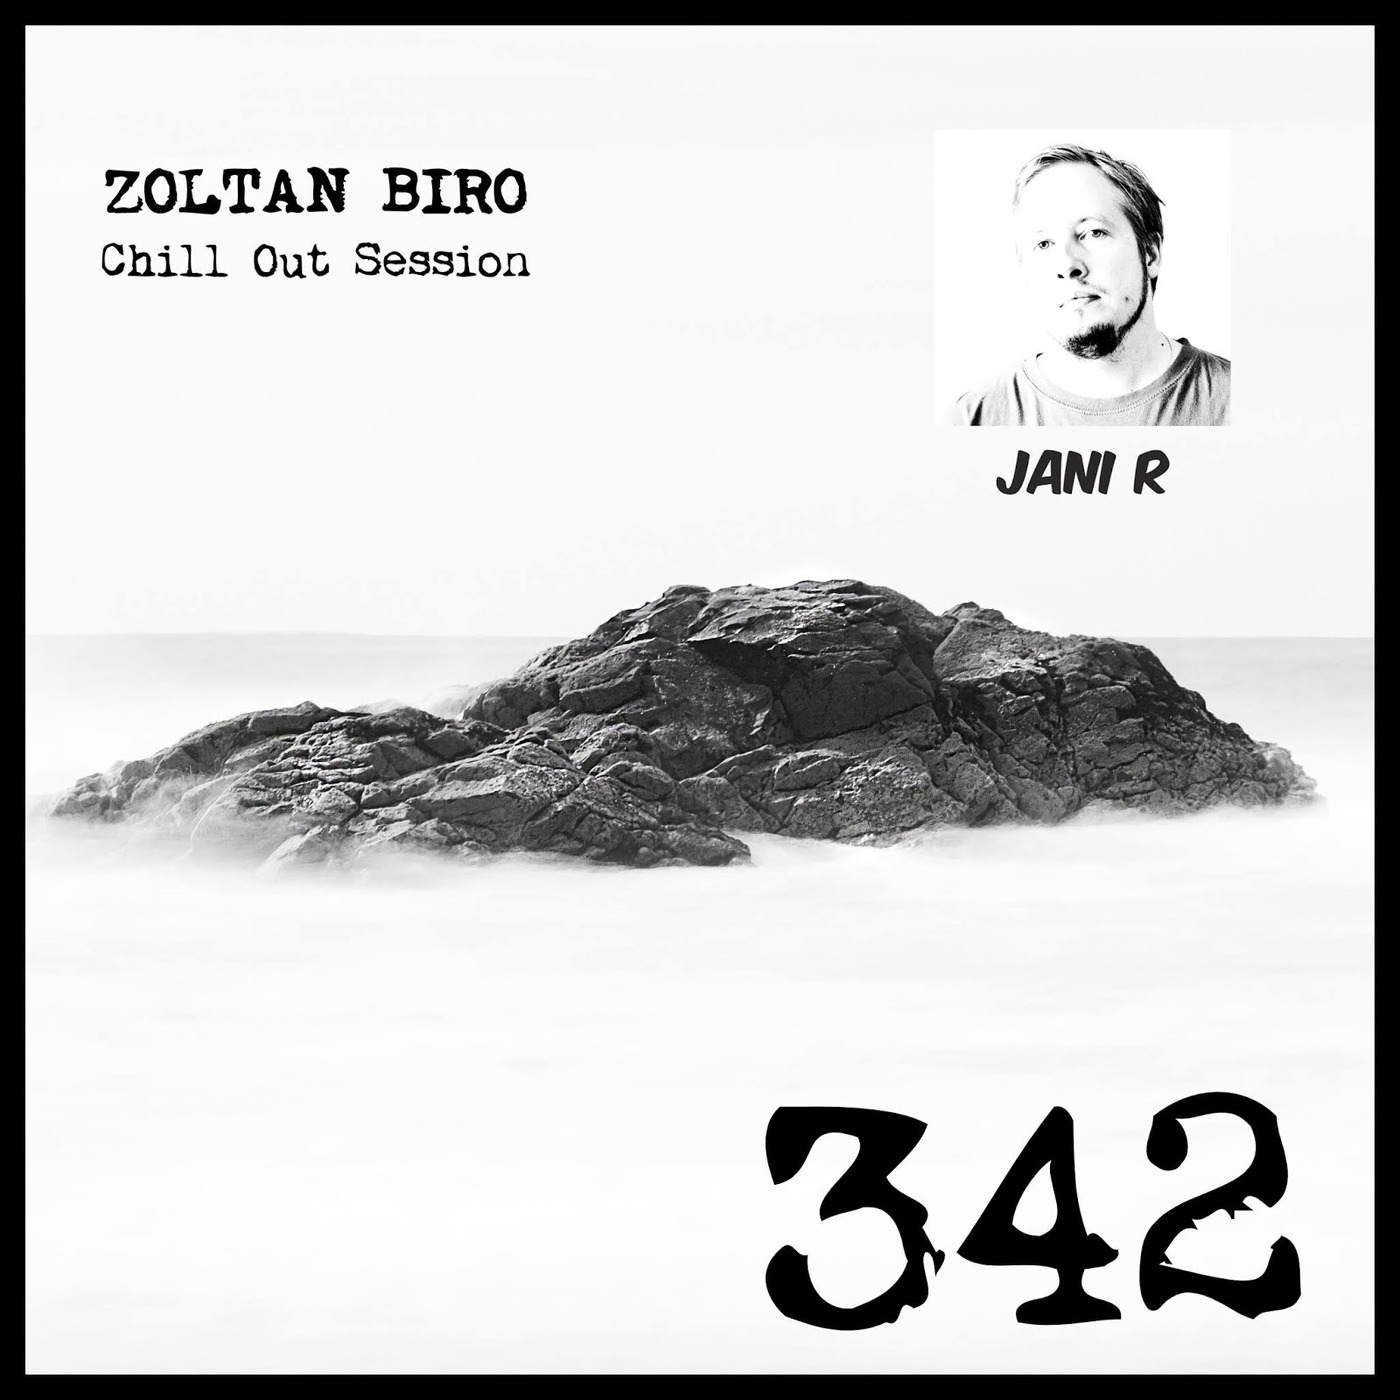 Zoltan Biro - Chill Out Session 342 [including: Jani R Special Mix]